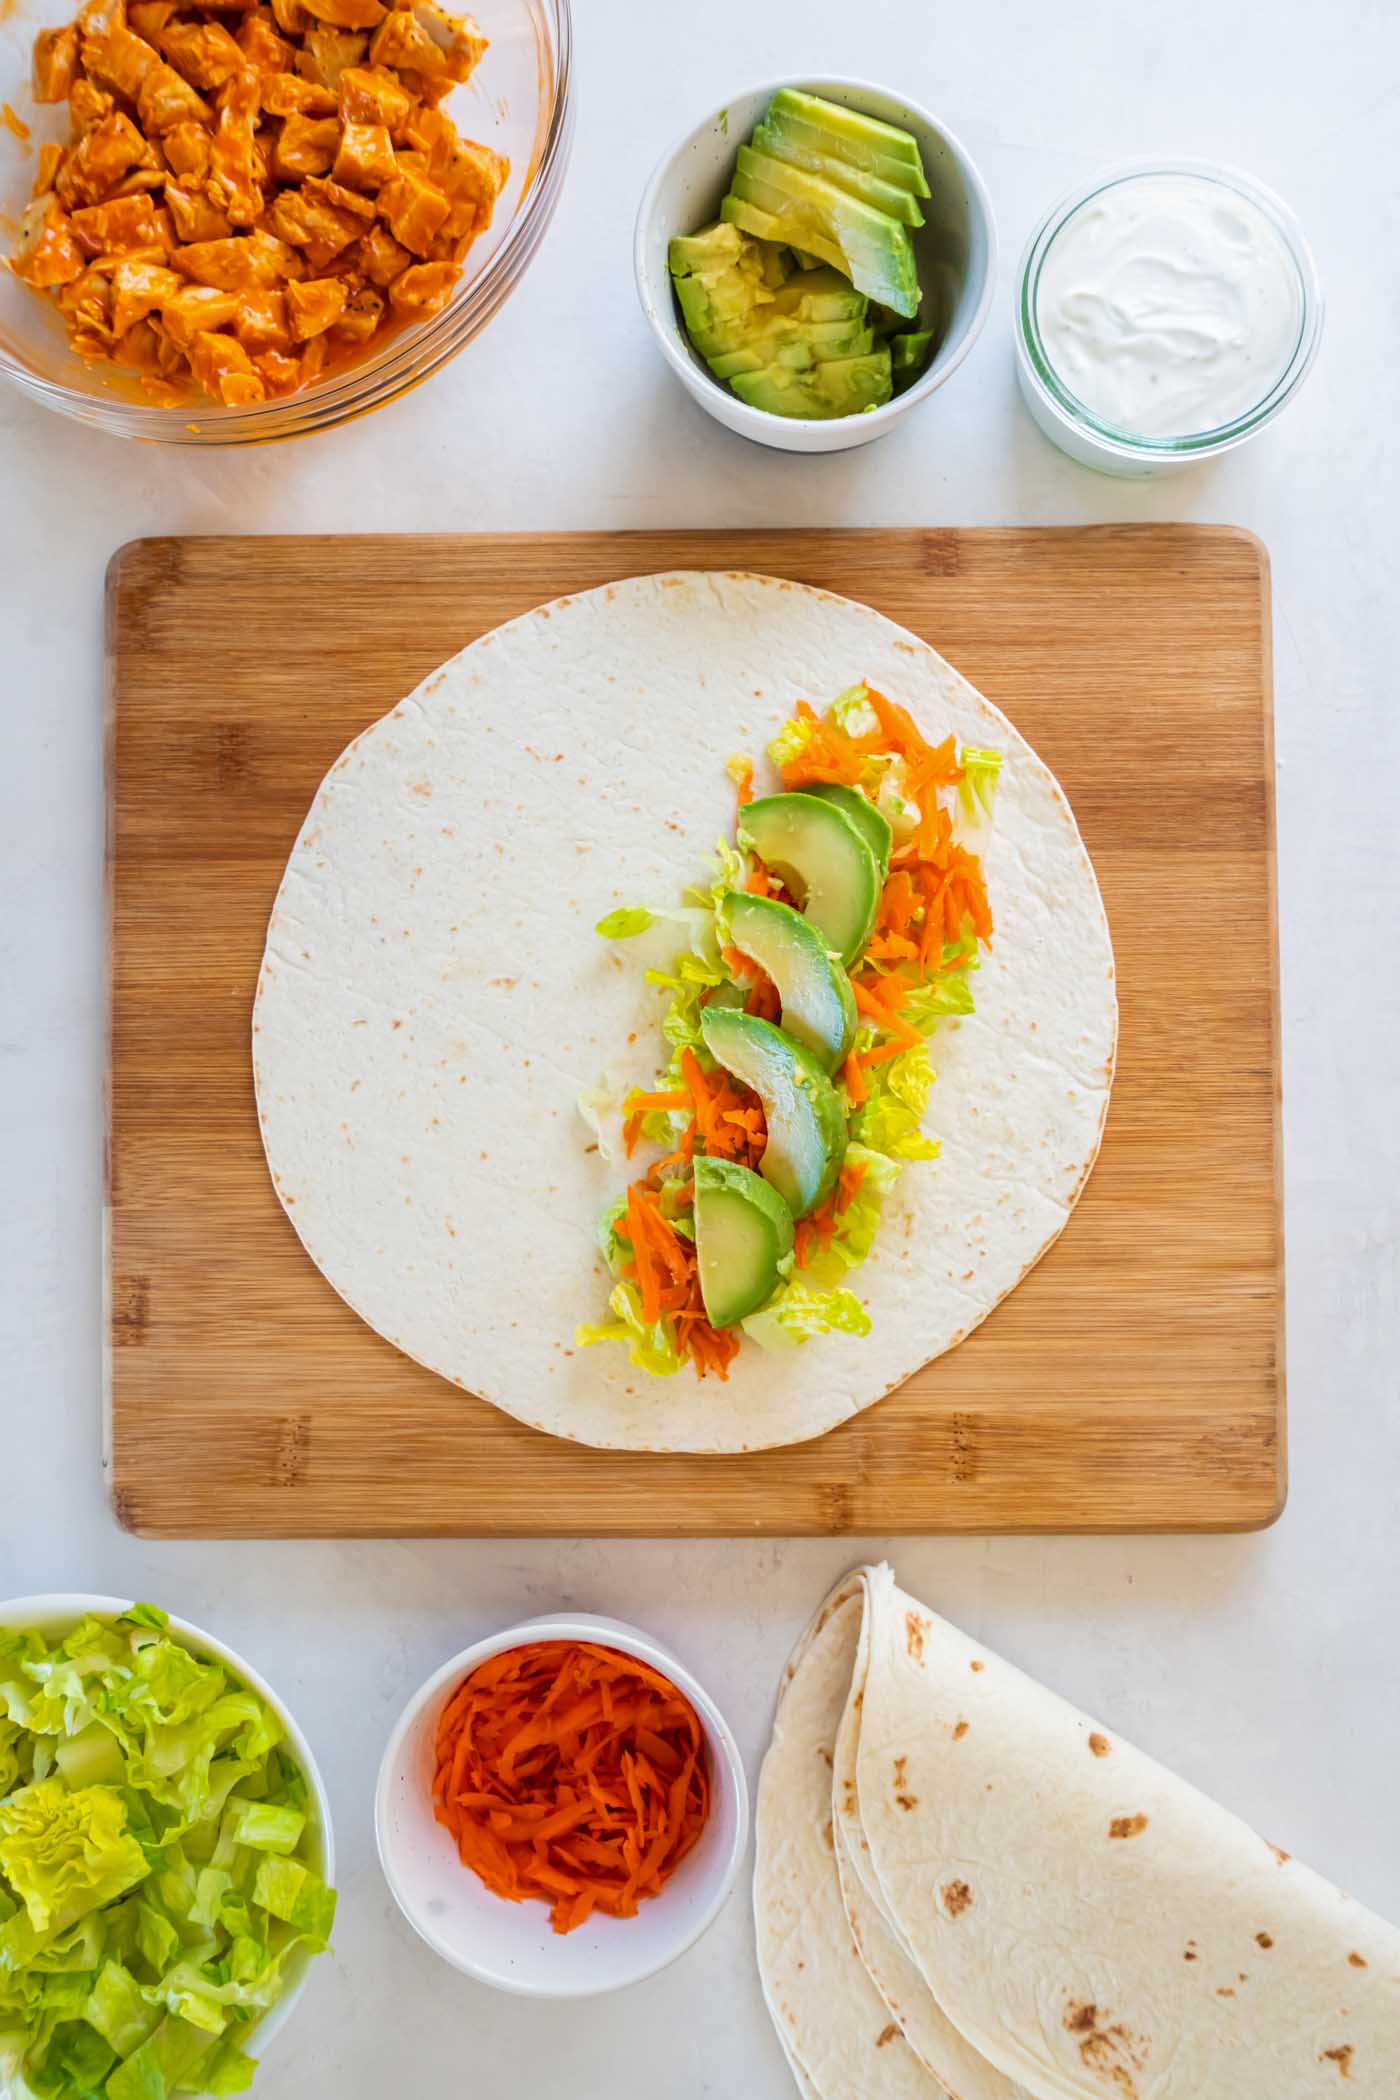 Tortilla with lettuce, shredded carrot and avocado.